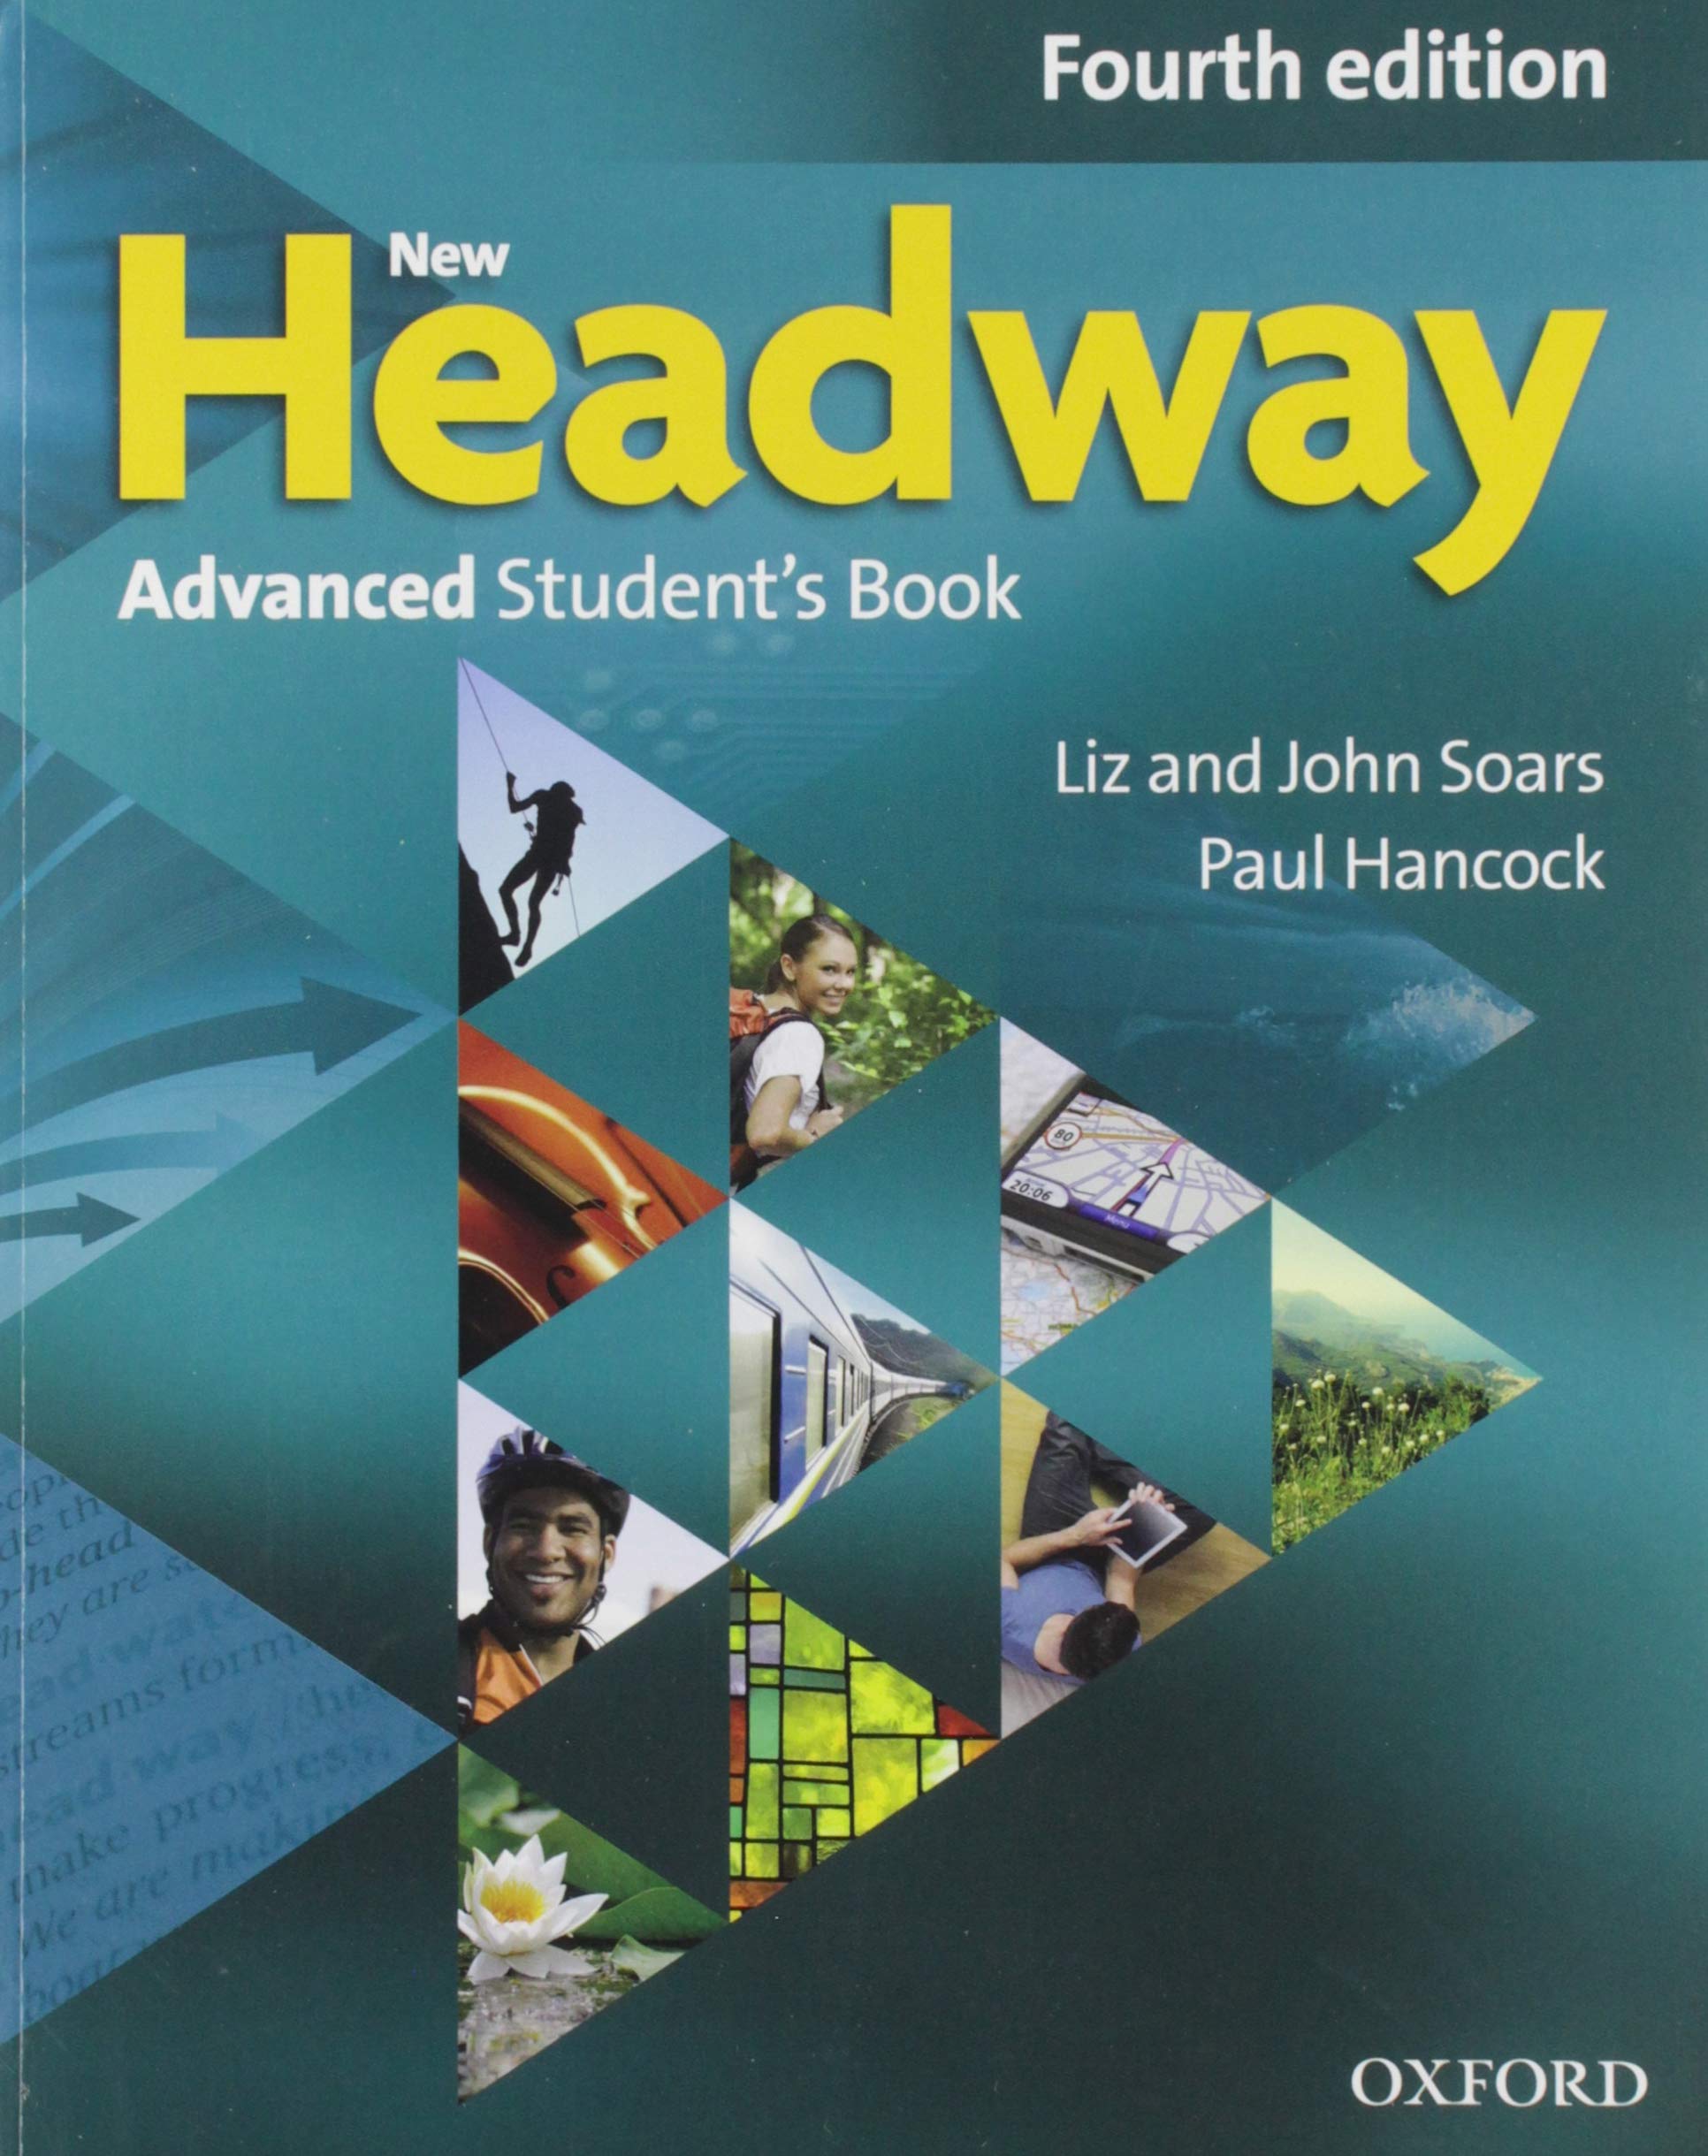 Oxford student s book. New Headway Advanced 4th. New Headway 4th Edition. Oxford Headway 4 Edition book. New Headway, Oxford.